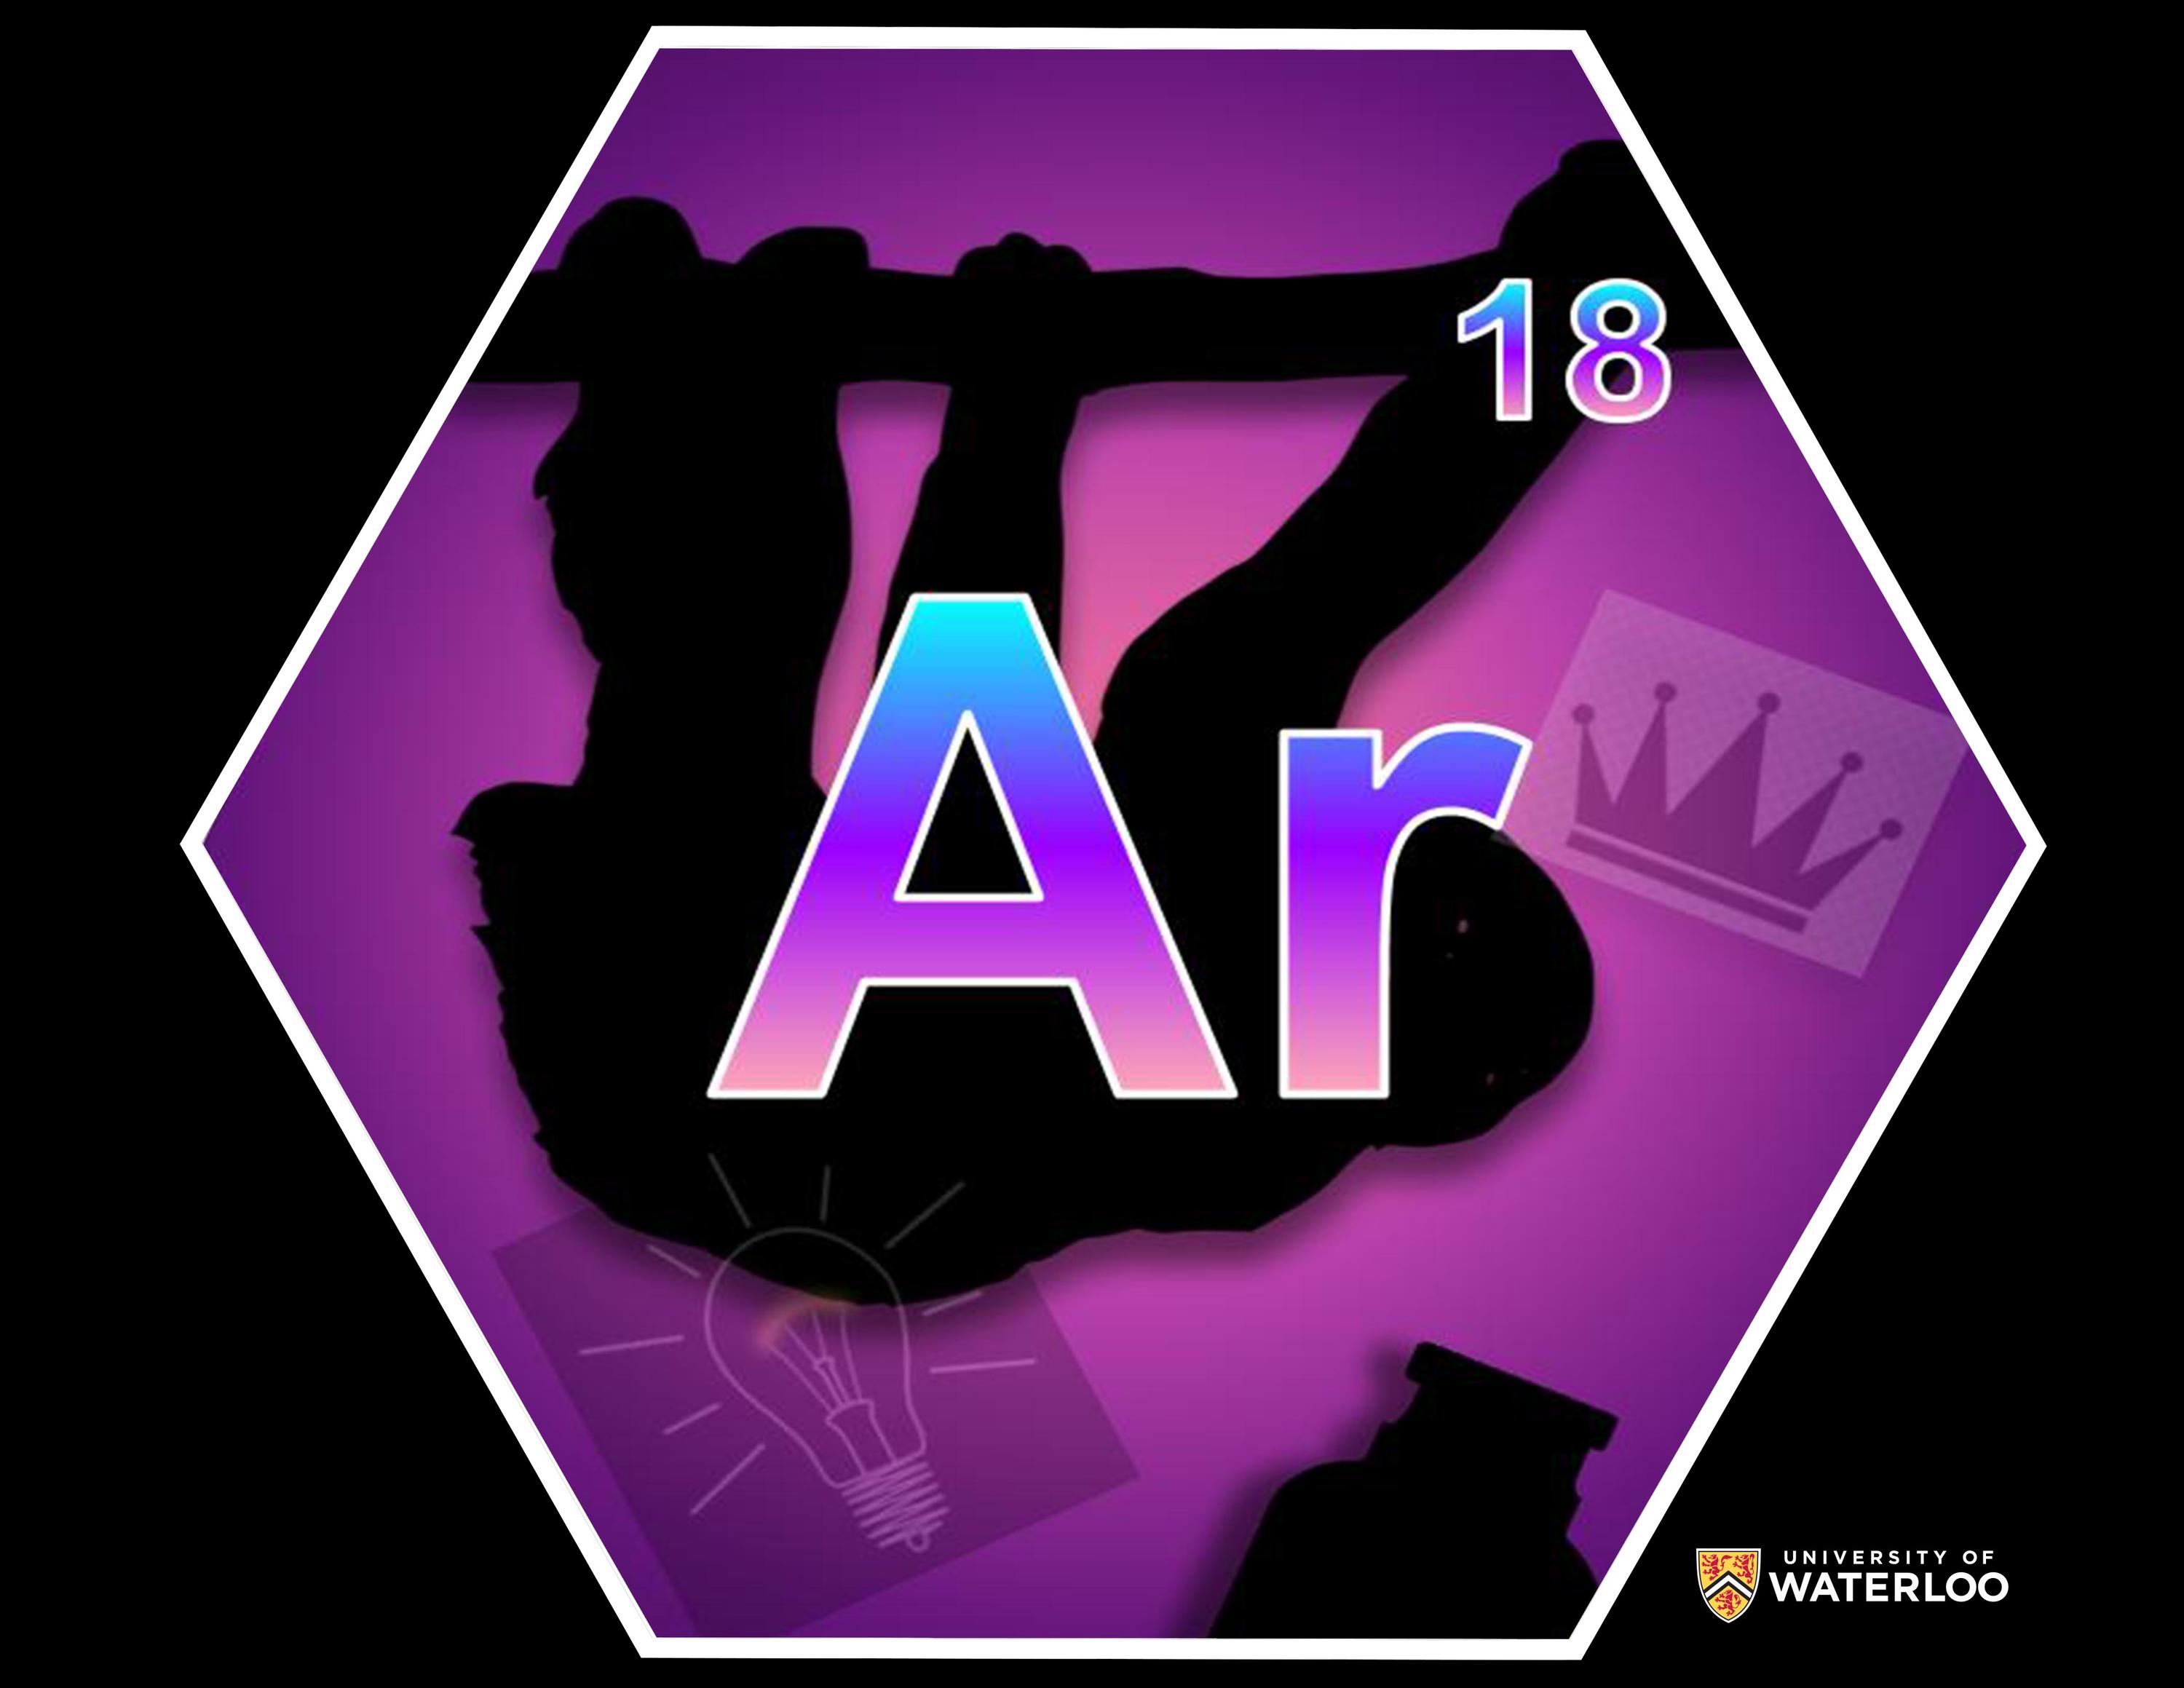 Digital image on bright purple background. A black silhouette of a sloth appears centre behind the chemical symbol “Ar” and the atomic number “18”. Additional symbols including a light bulb, crown and the silhouette of an argon gas canister.